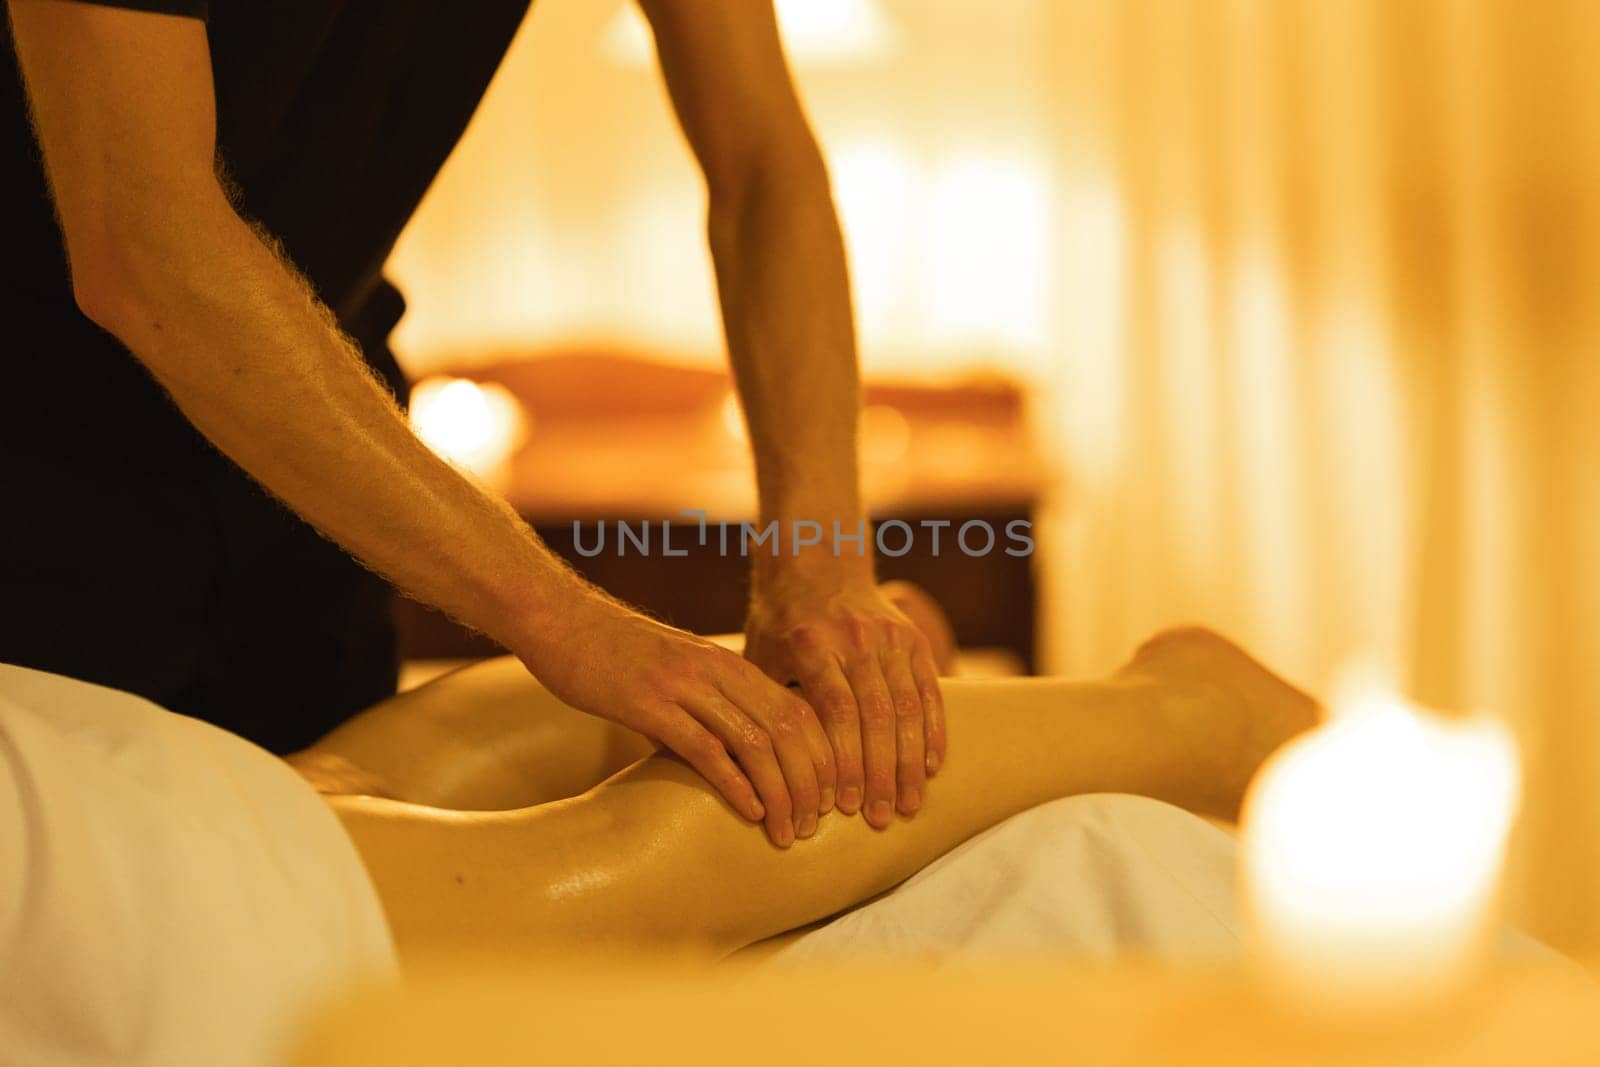 Massage in spa salon - a man massages the shin of a woman client. Mid shot